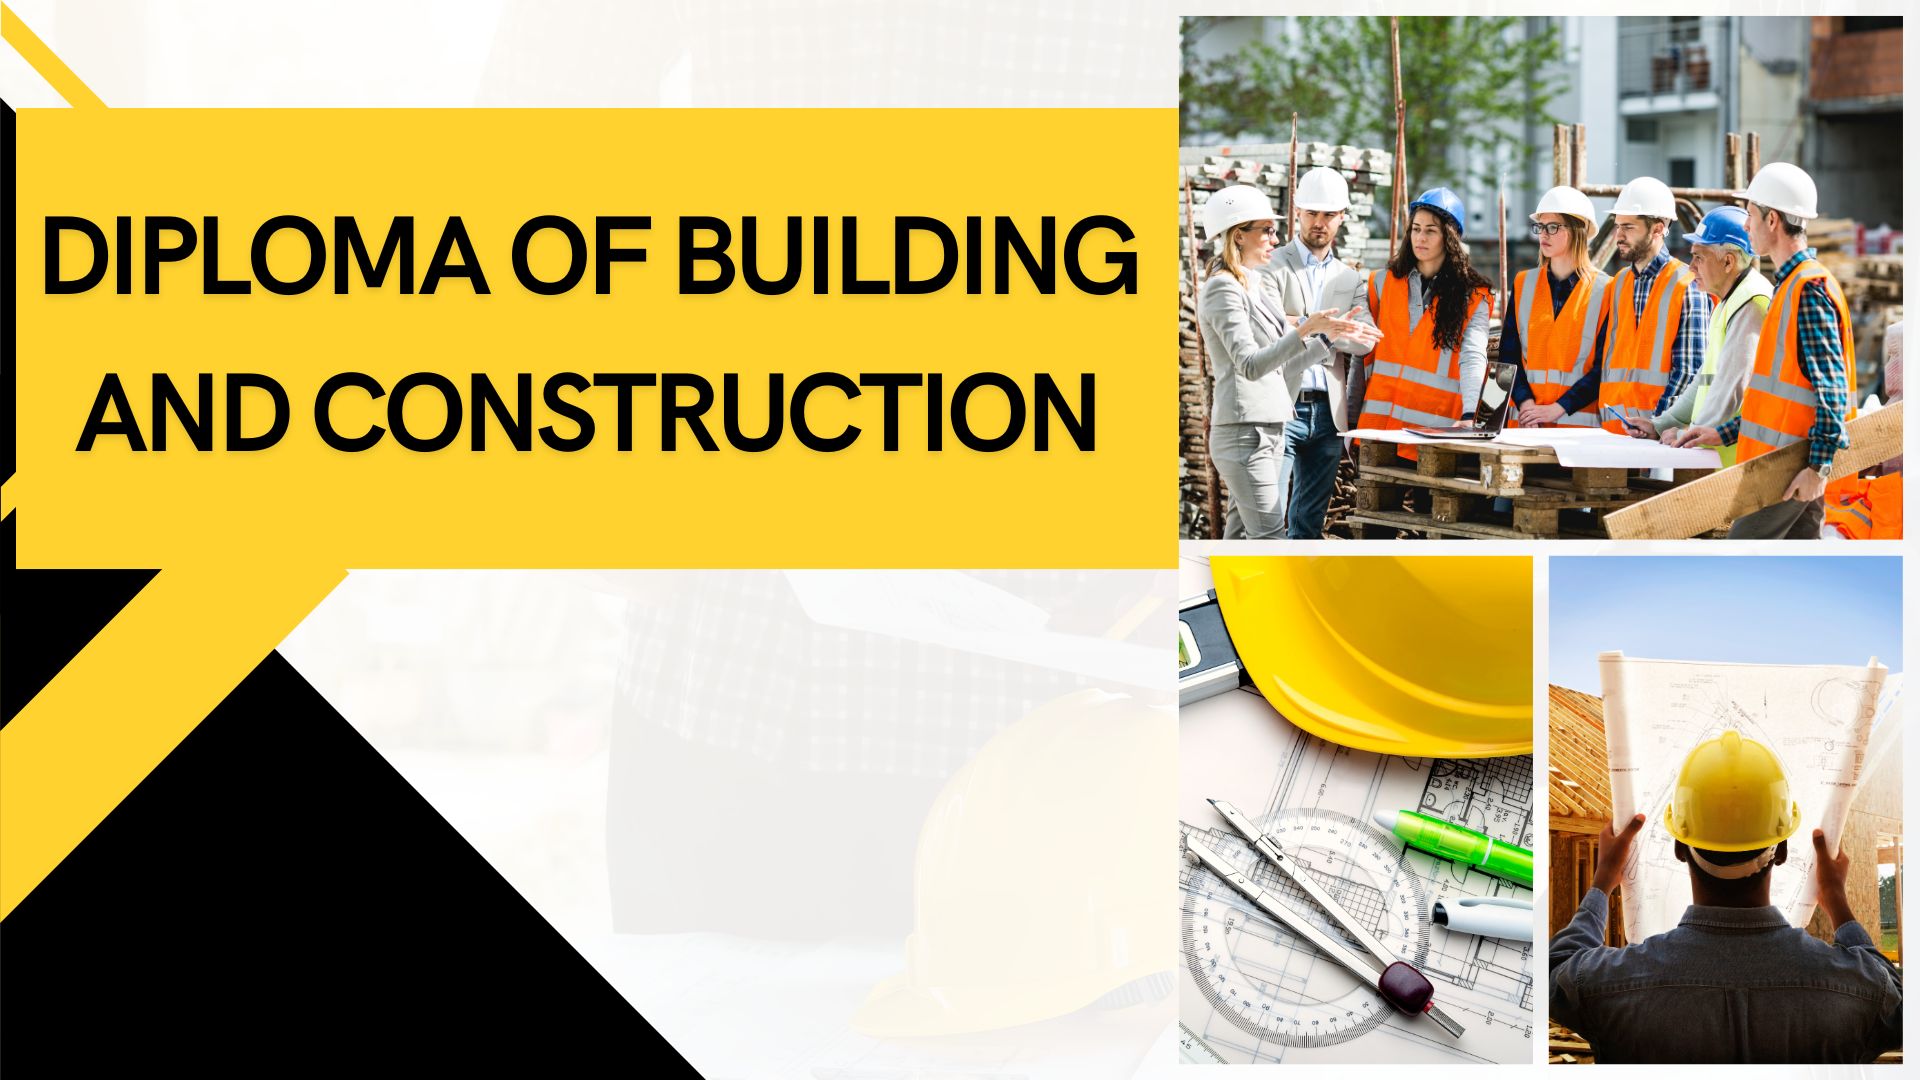 Diploma of Building and Construction